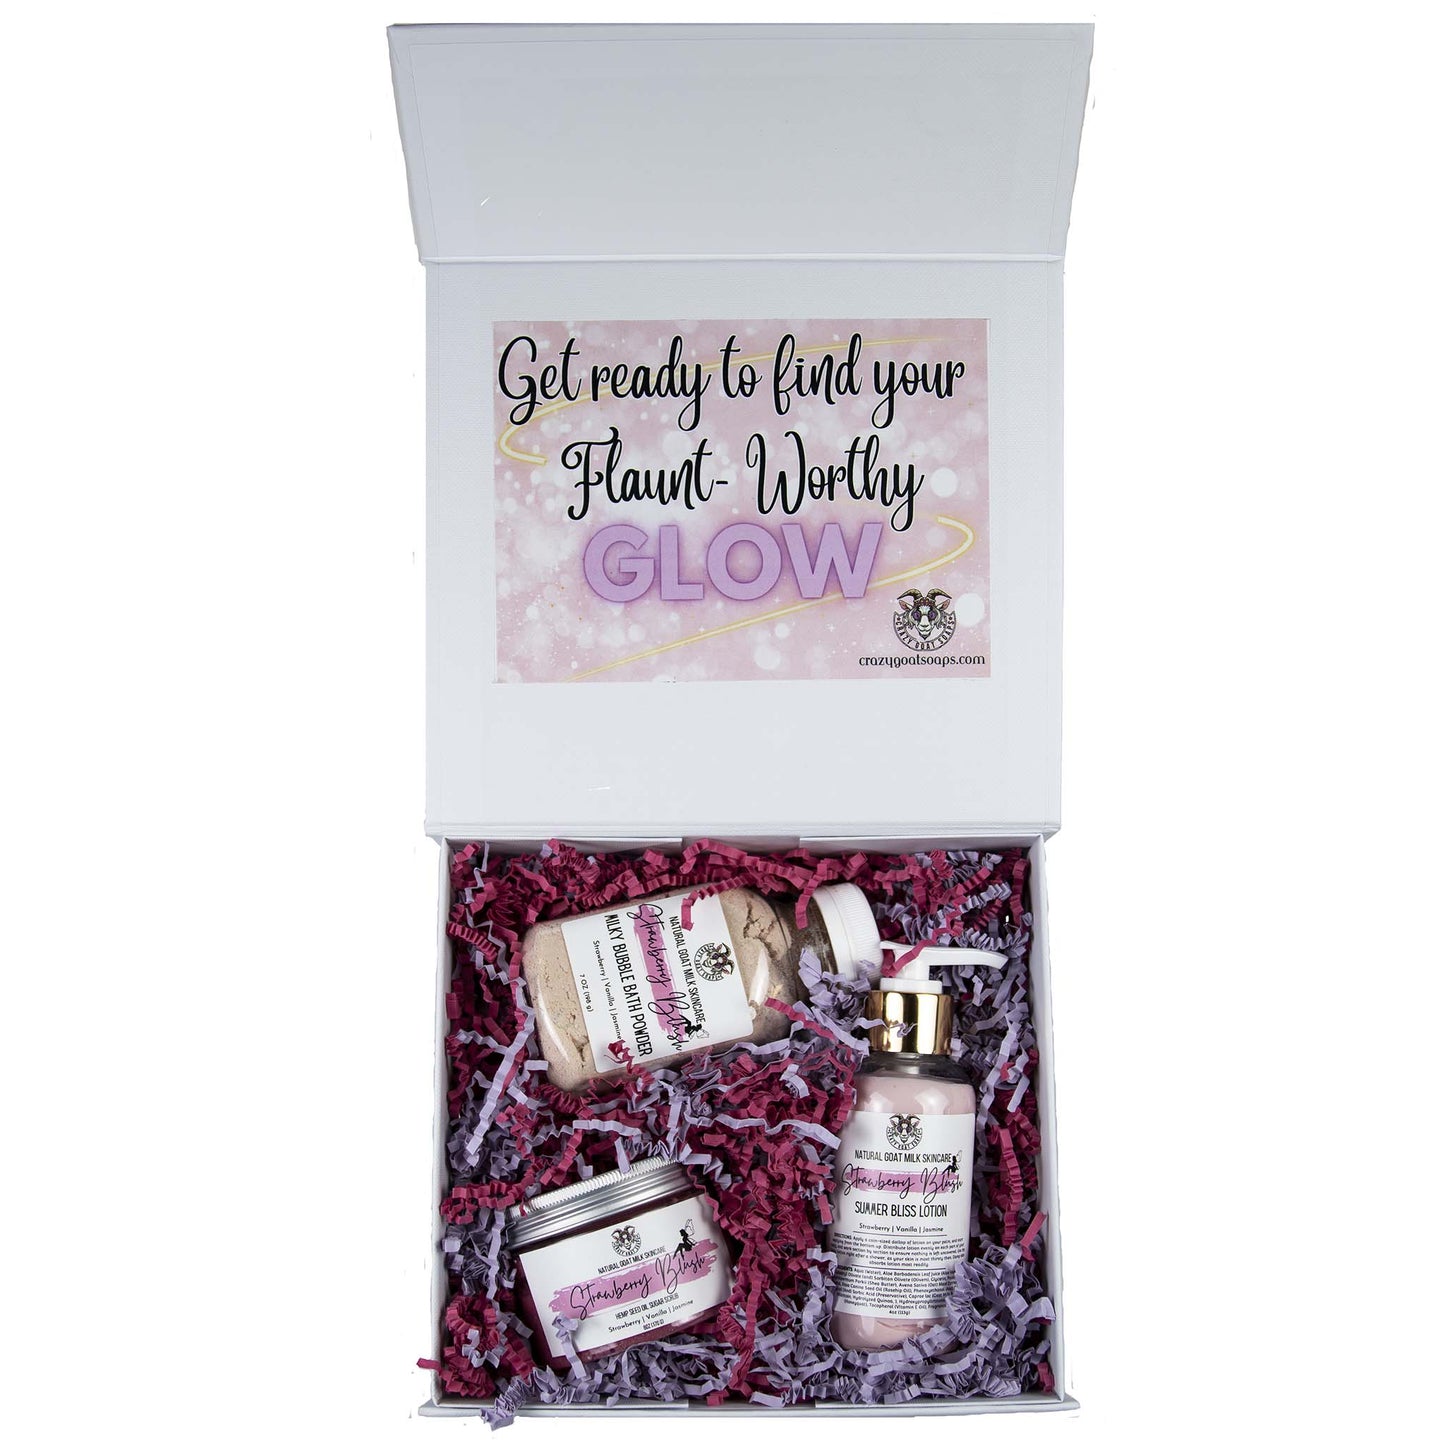 Perfect for any Occasion - Goat Milk Spa Gift Set with Lotion, Bubble Bath and Hemp Seed Sugar Scrub